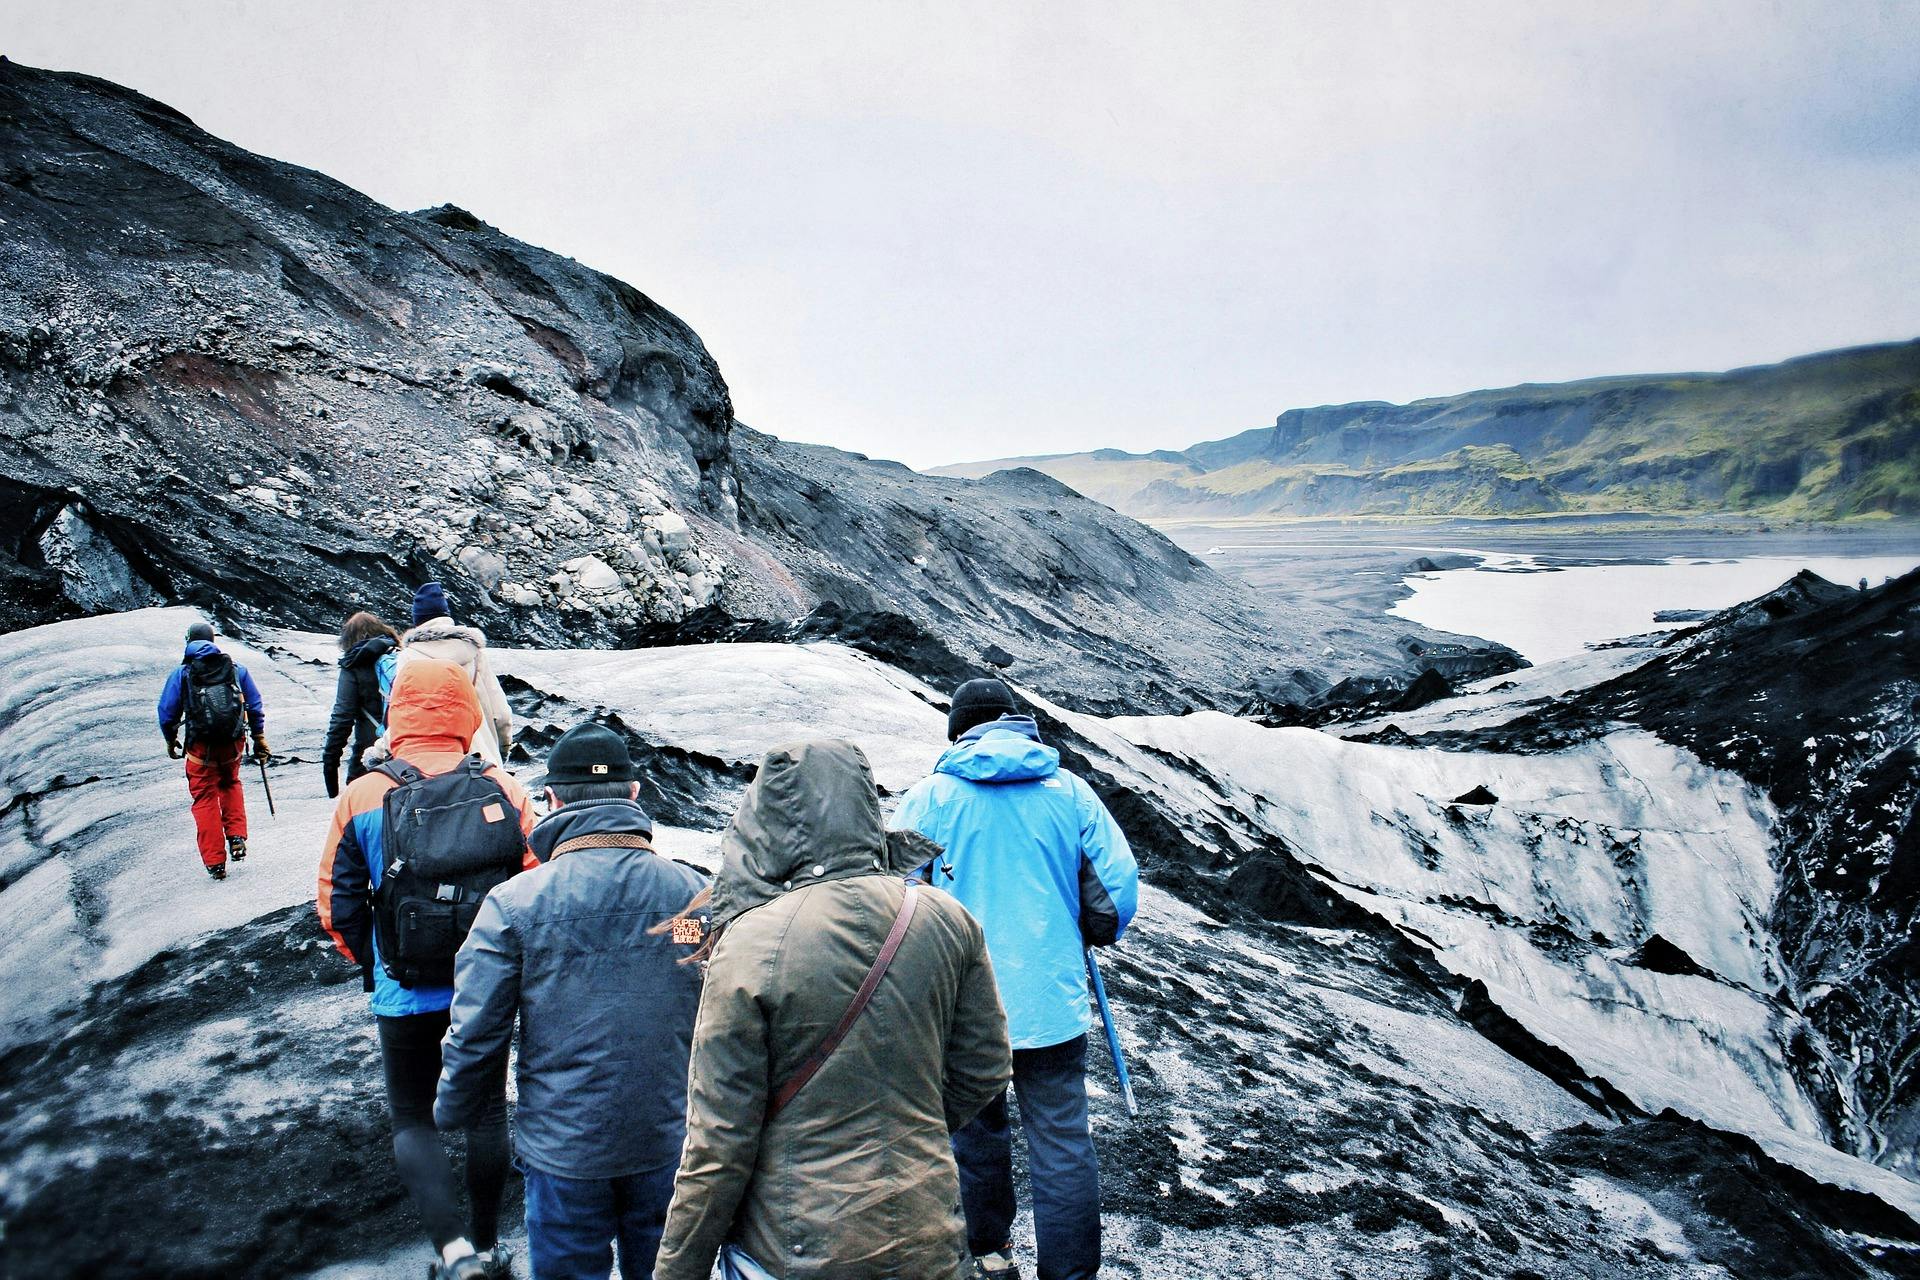 Glacier hiking on Solheimajokull is a thrilling experience.